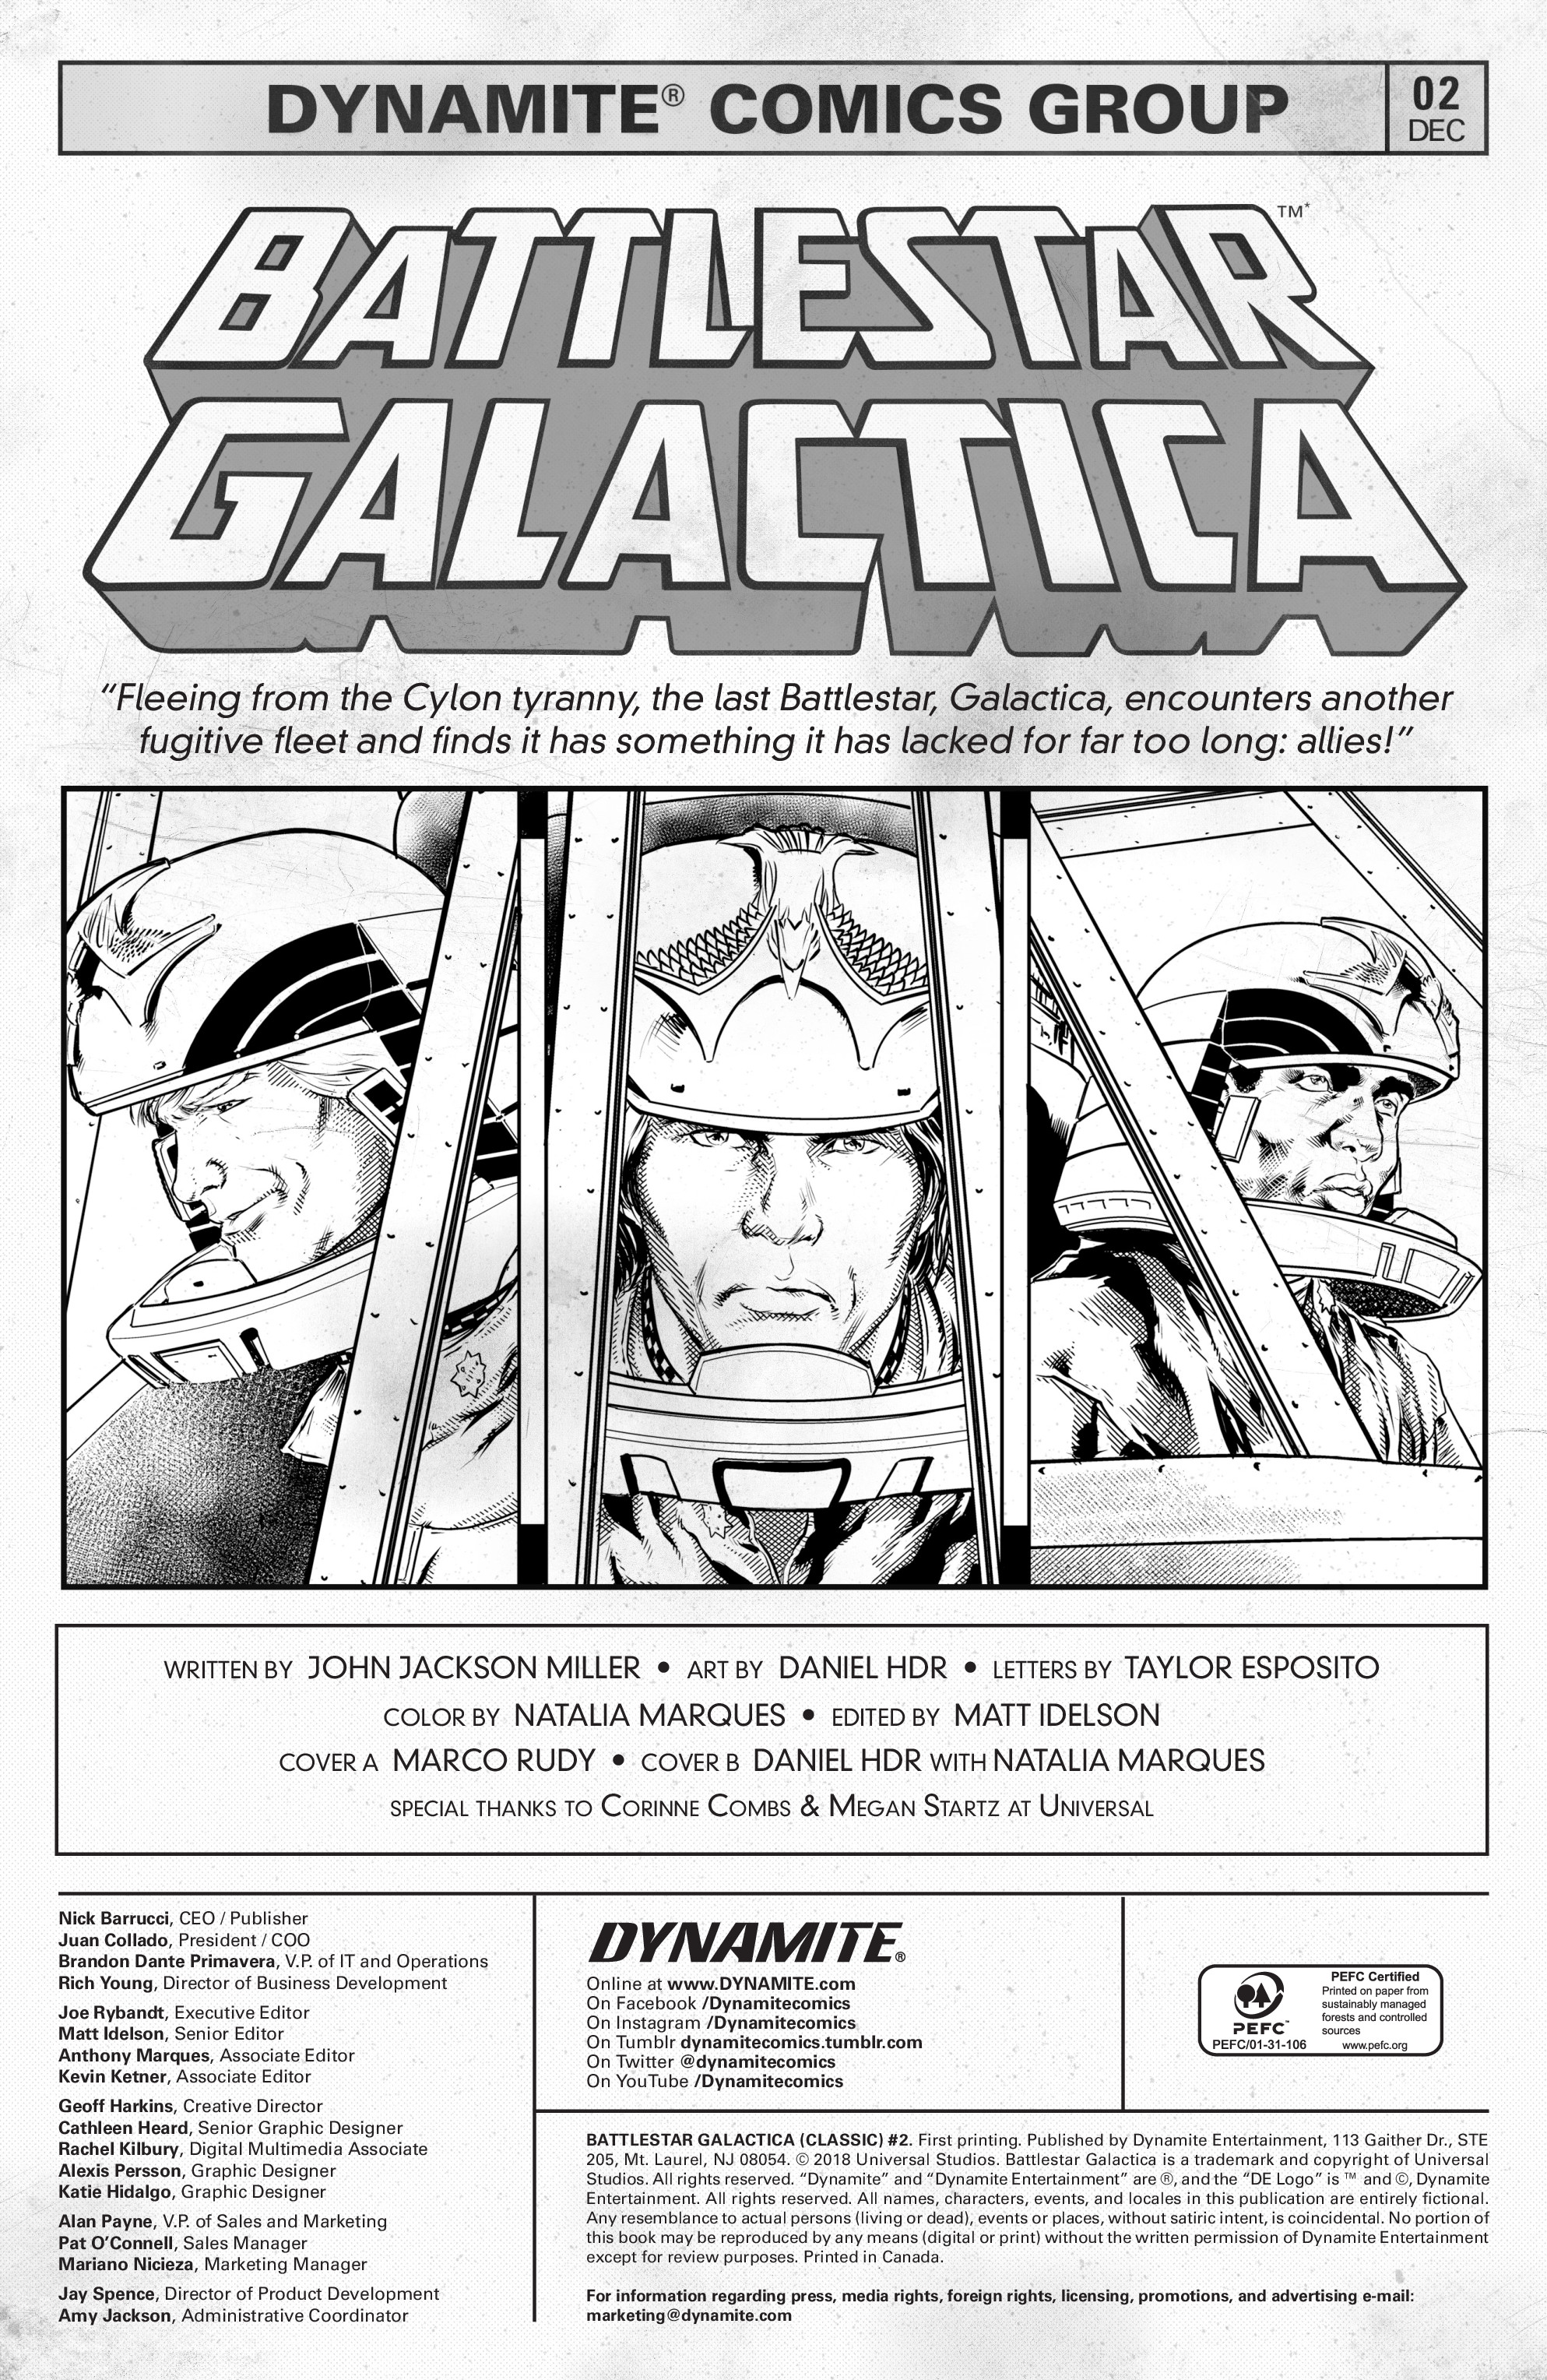 Battlestar Galactica: Classic (2018-): Chapter 2 - Page 3